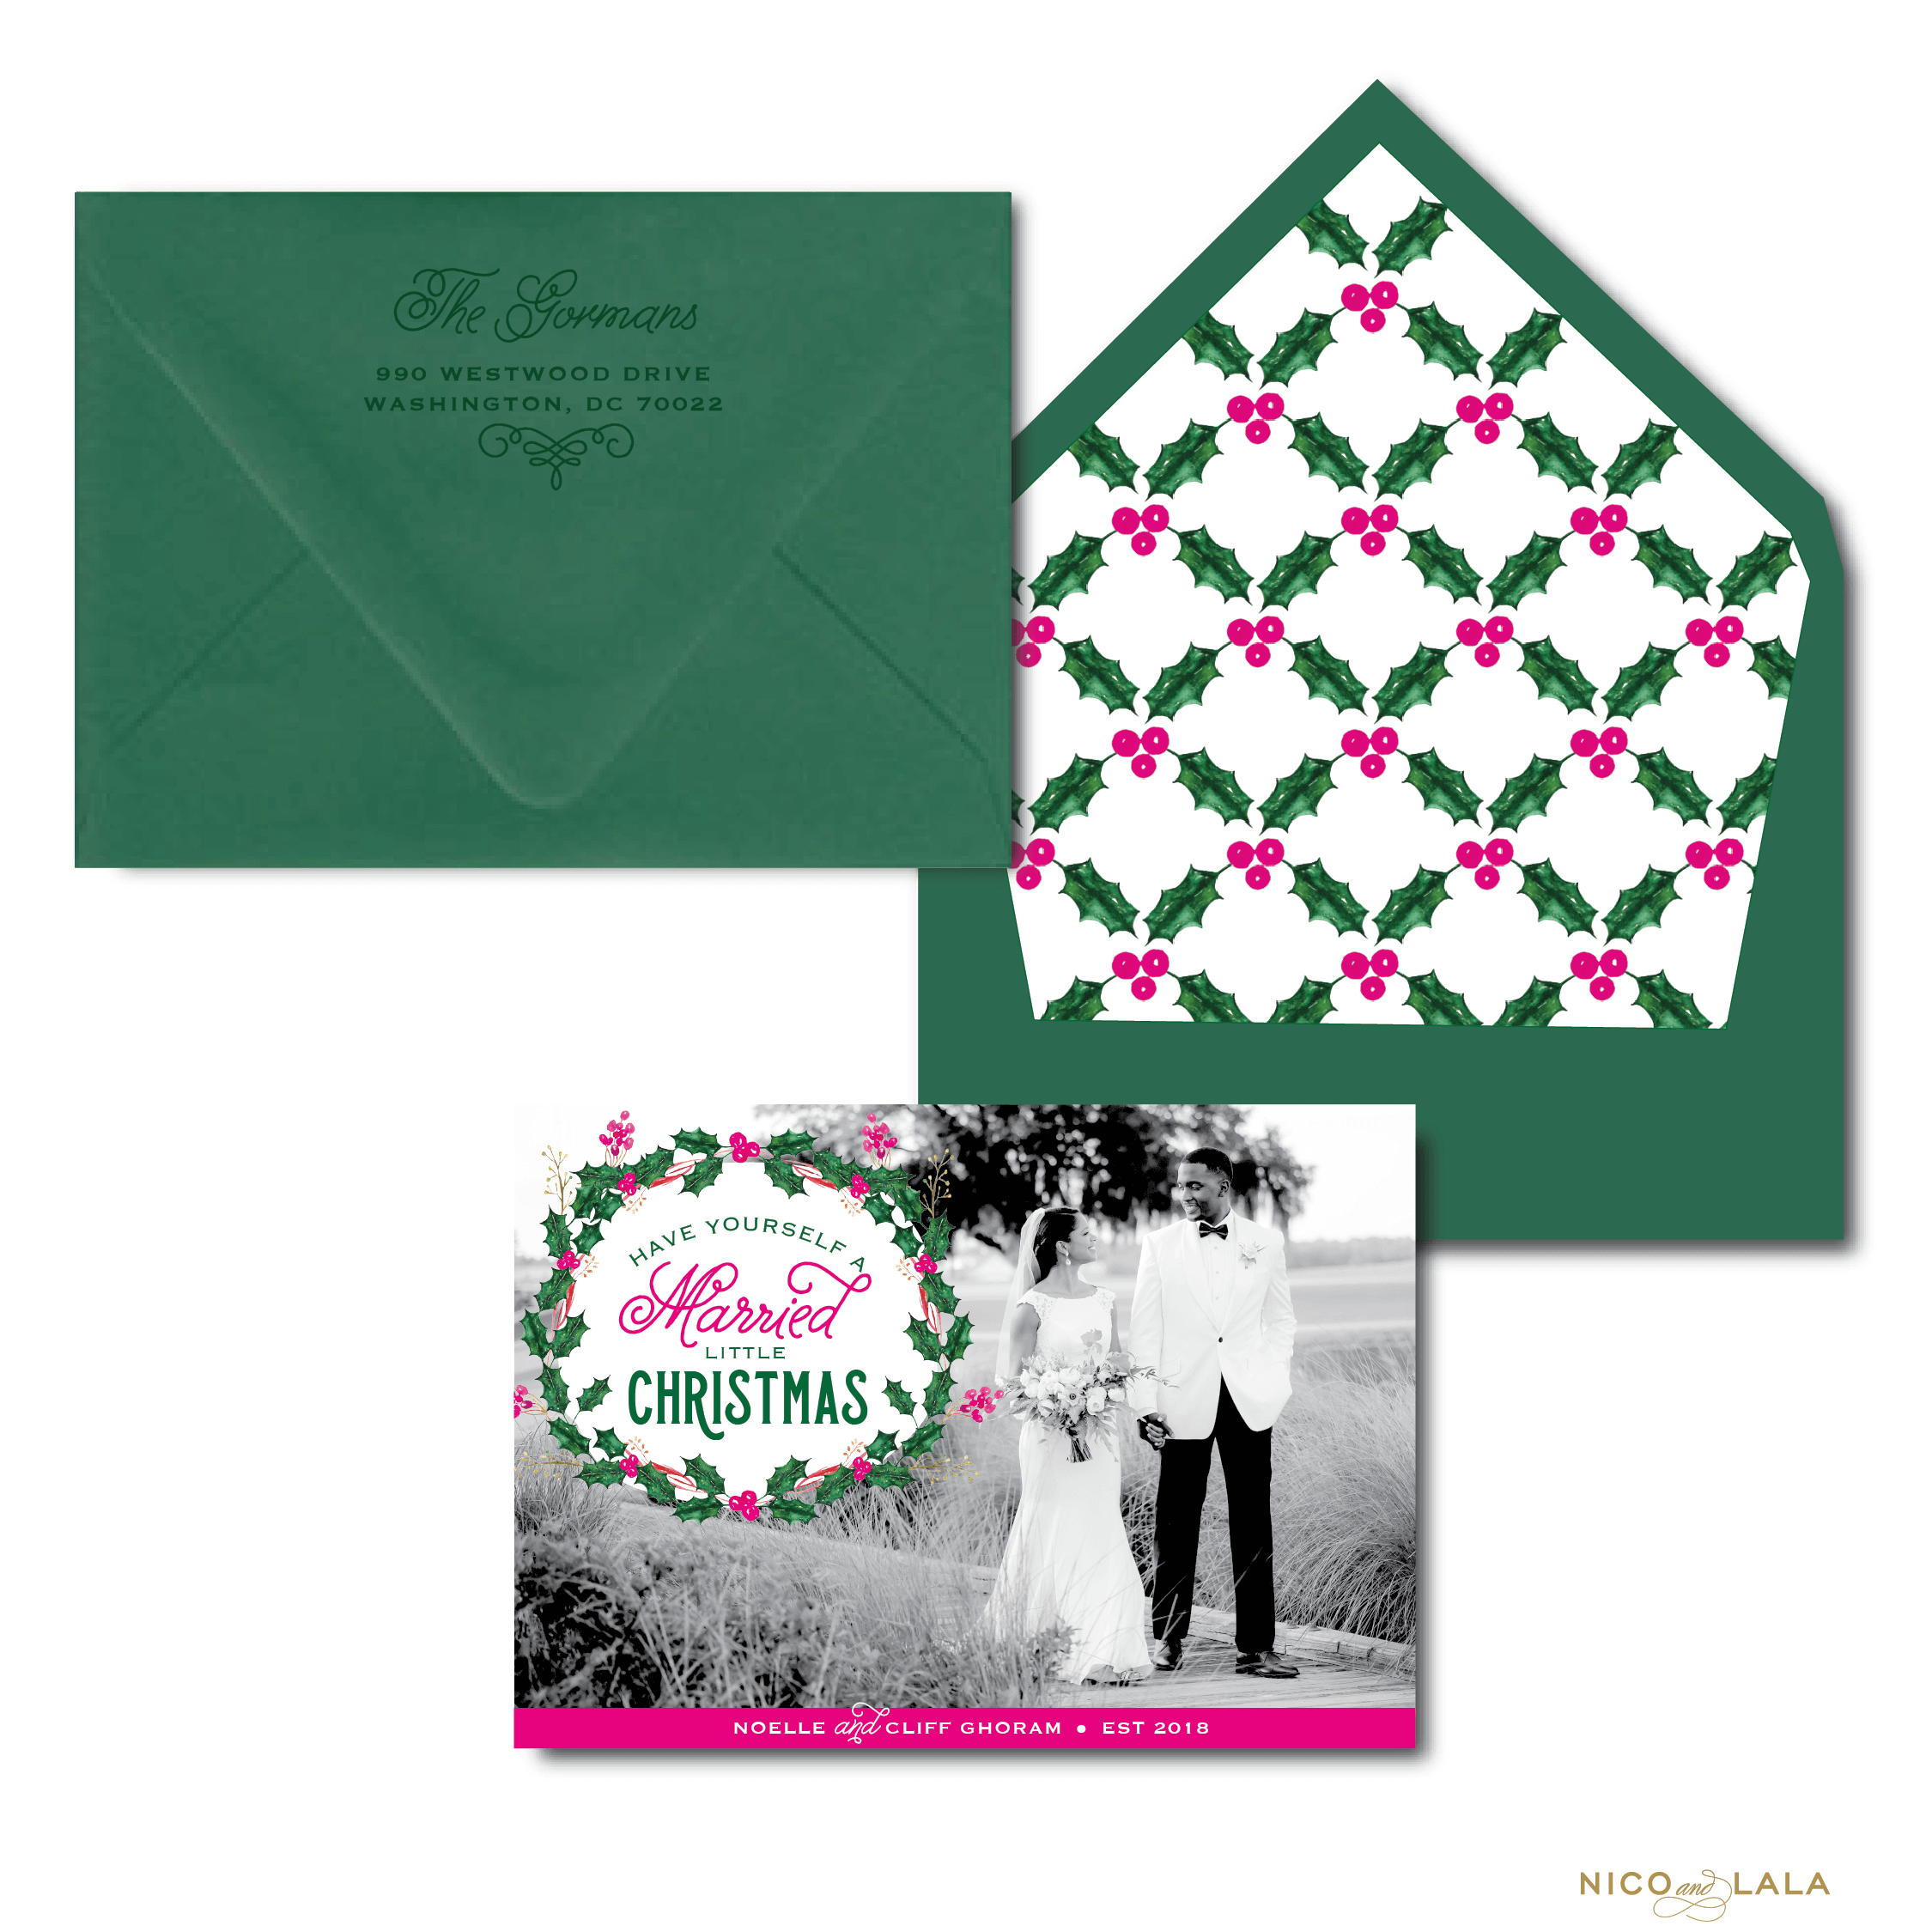 Have yourself a Married Little Christmas Card